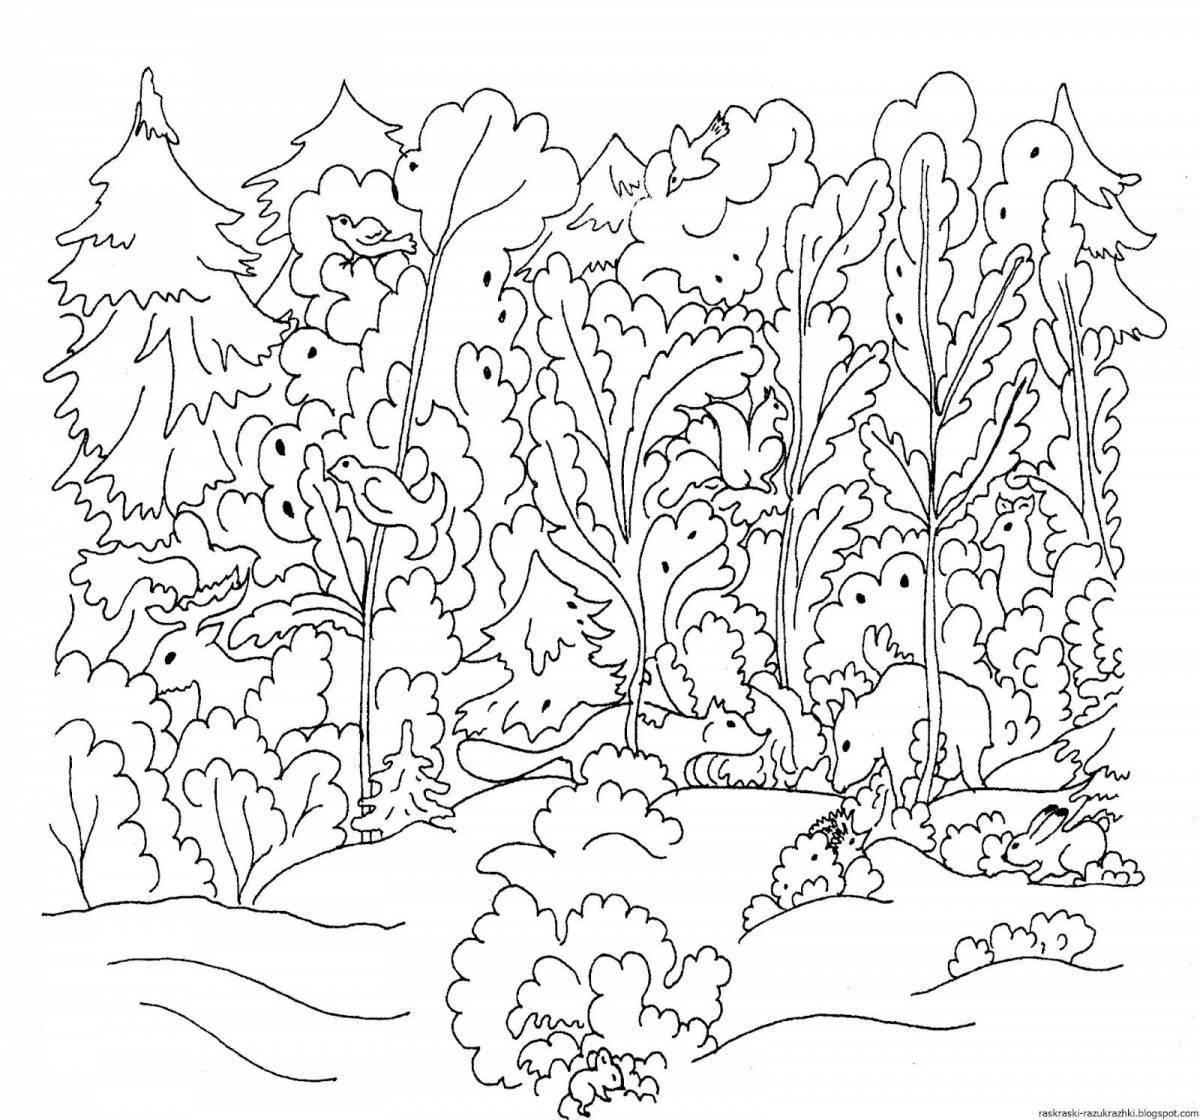 A fun winter plant coloring book for kids